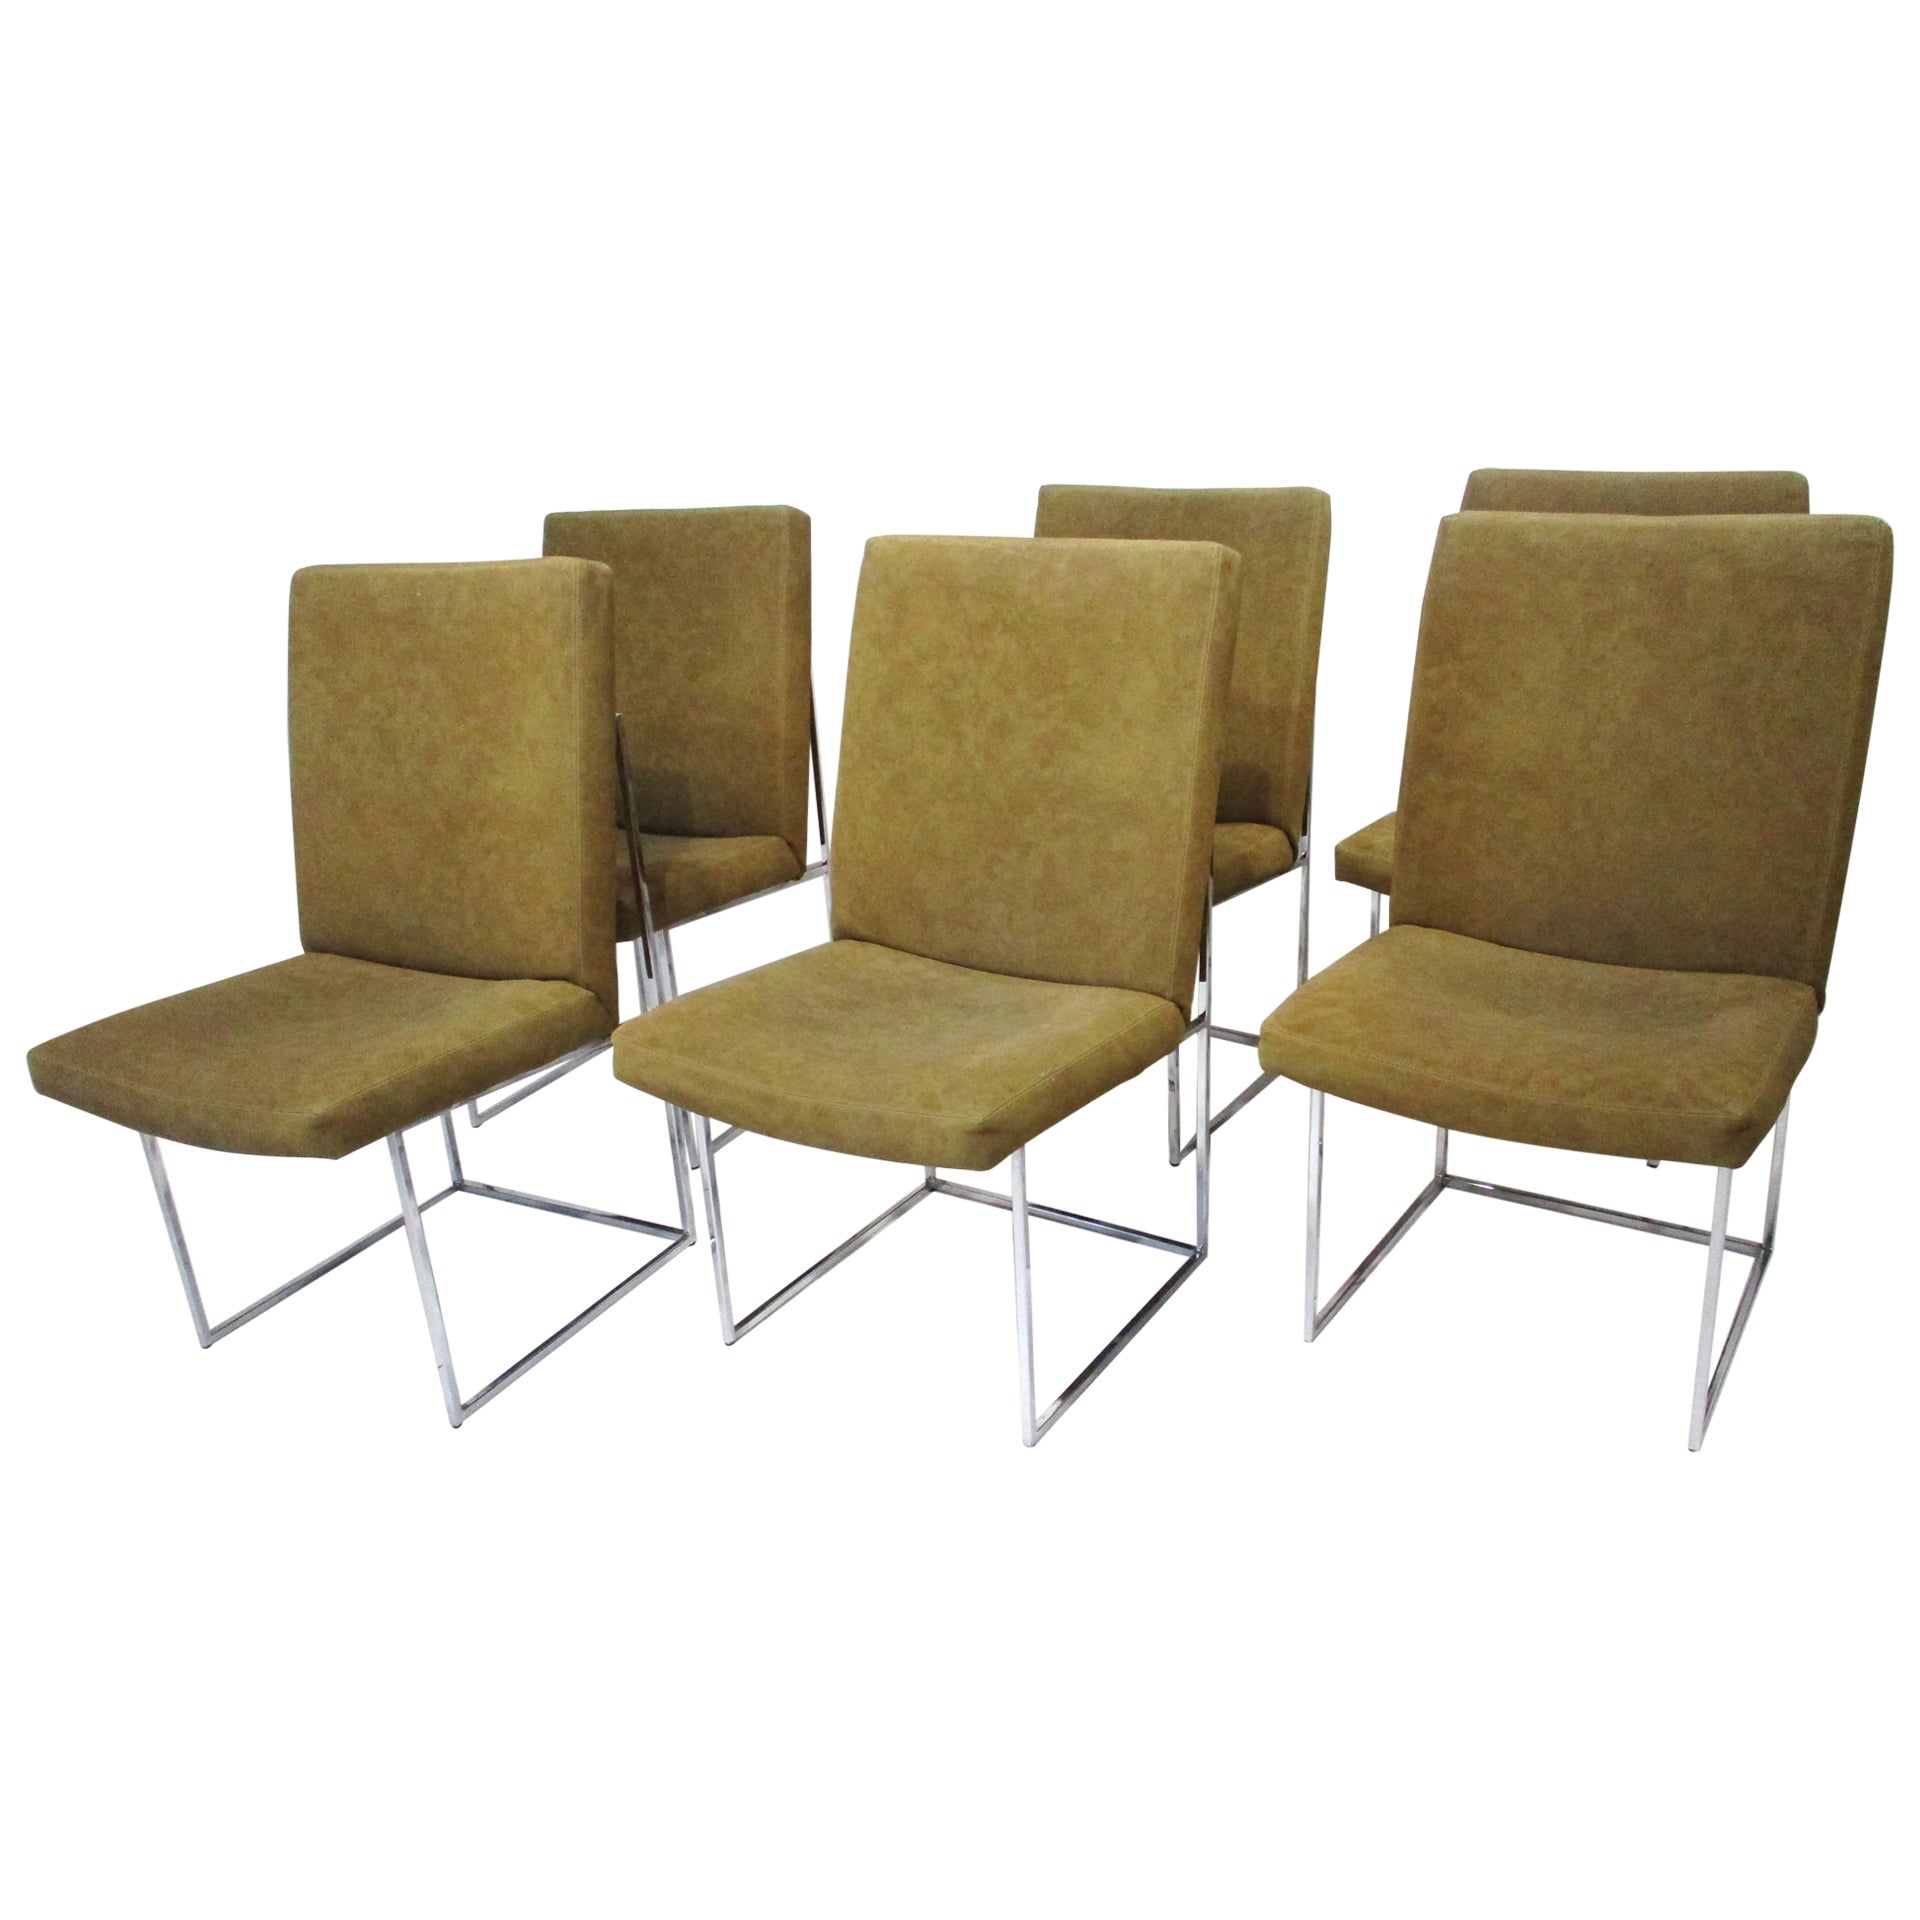 6 Milo Baughman Chrome and Suede Dining Chairs for Thayer Coggin   